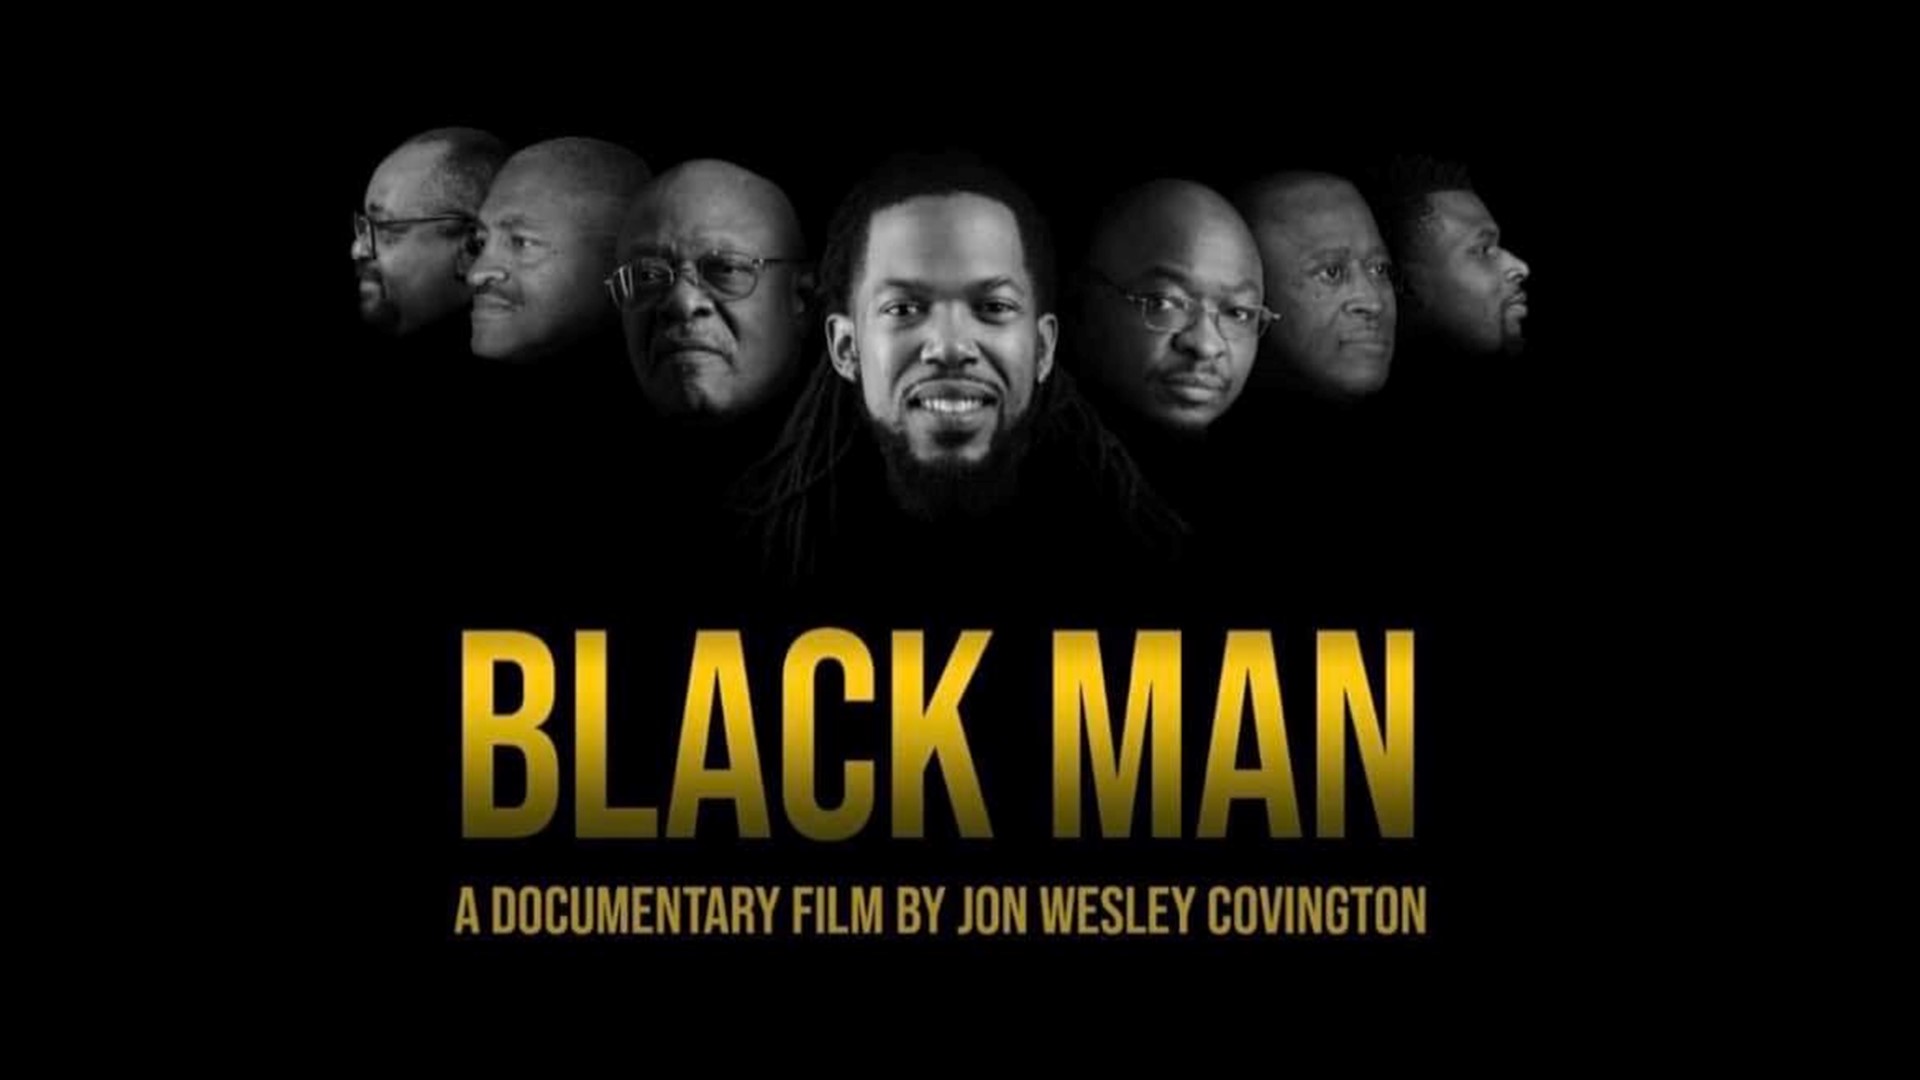 As we kickoff Black History Month coverage on 13 ON YOUR SIDE, there’s a new documentary premiering this weekend in Muskegon called “Black Man.”